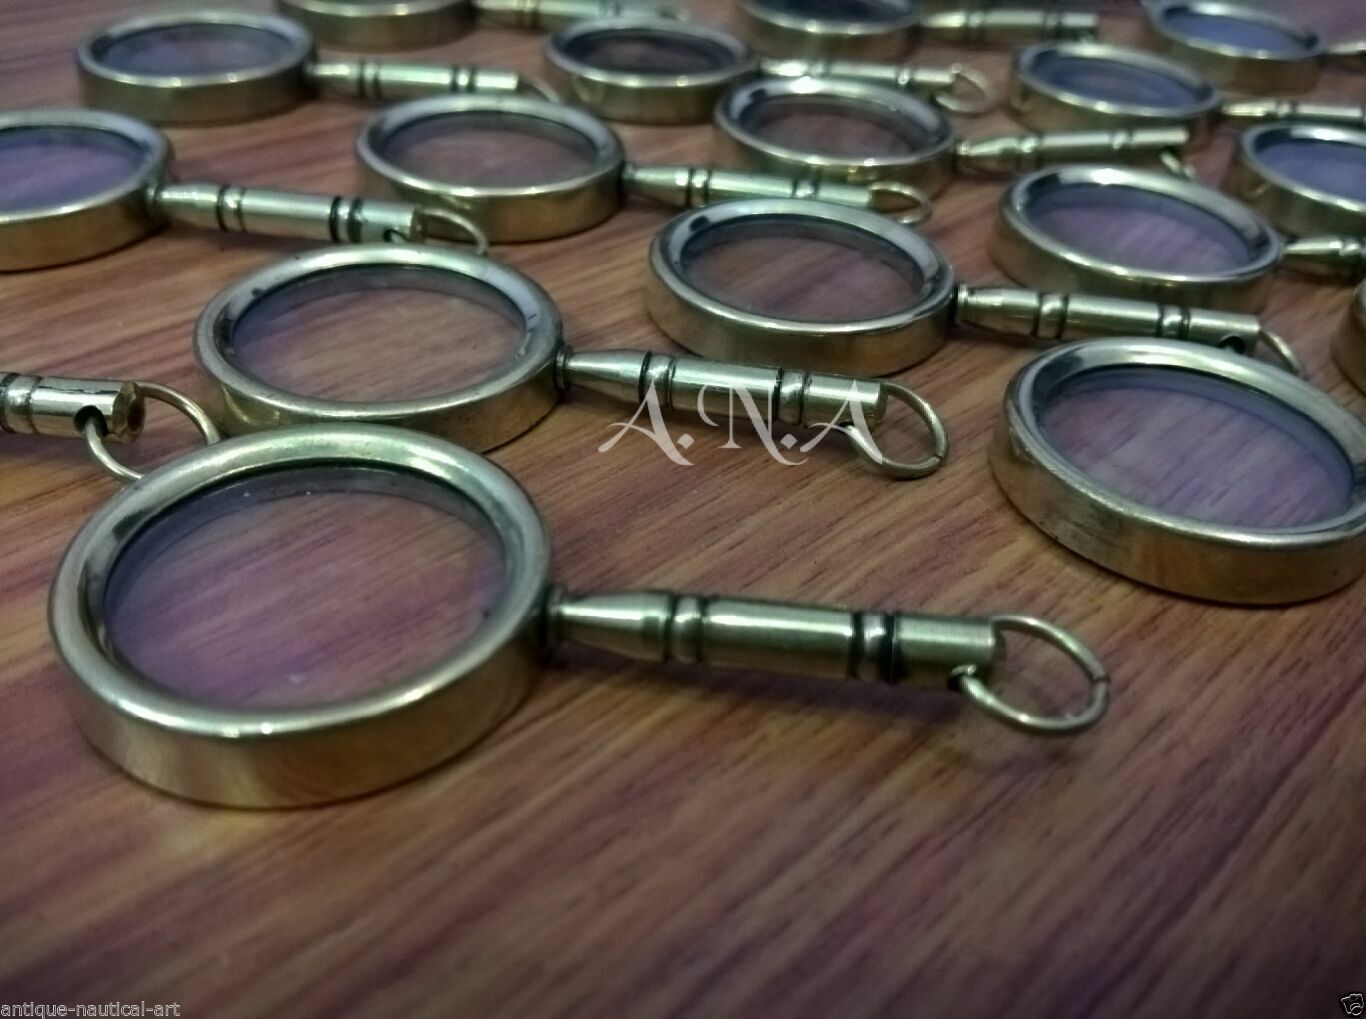 Lot Of 20 Pcs Brass Vintage Magnifier Key chain Collectible Magnifying Key Ring  Без бренда - фотография #3